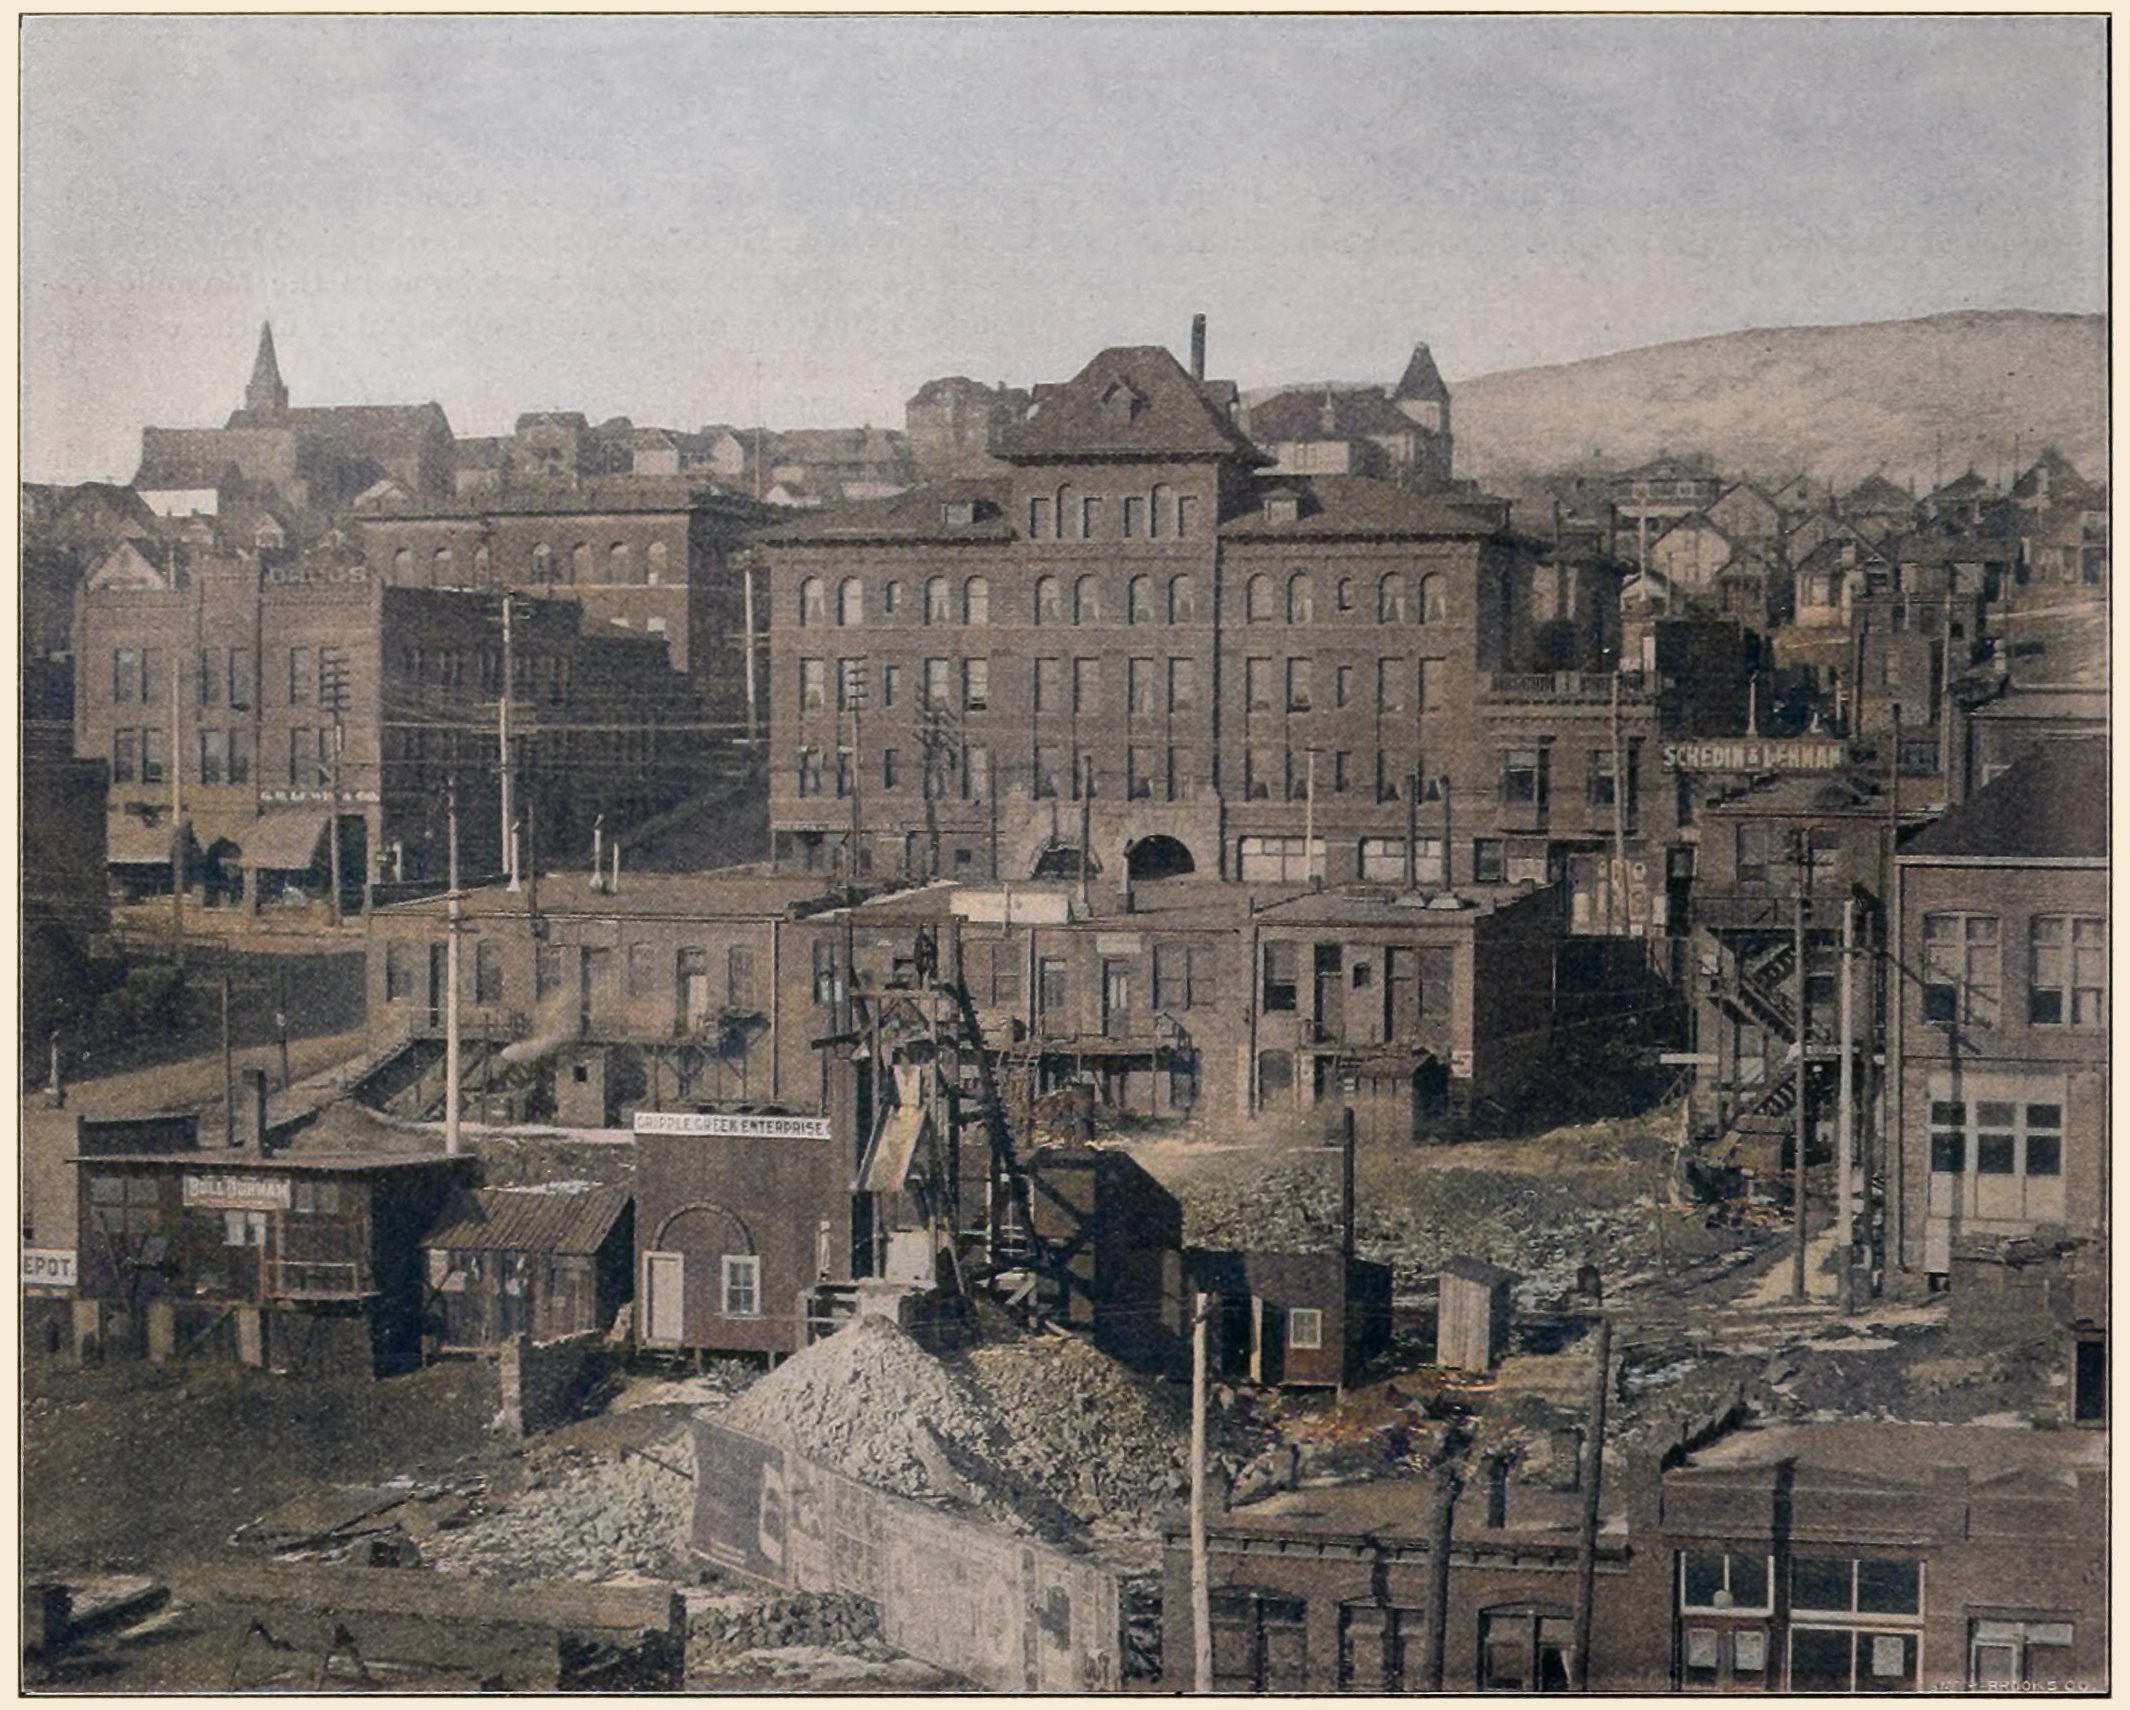 View of the National Hotel With the Cripple Creek City Mine in the Foreground.